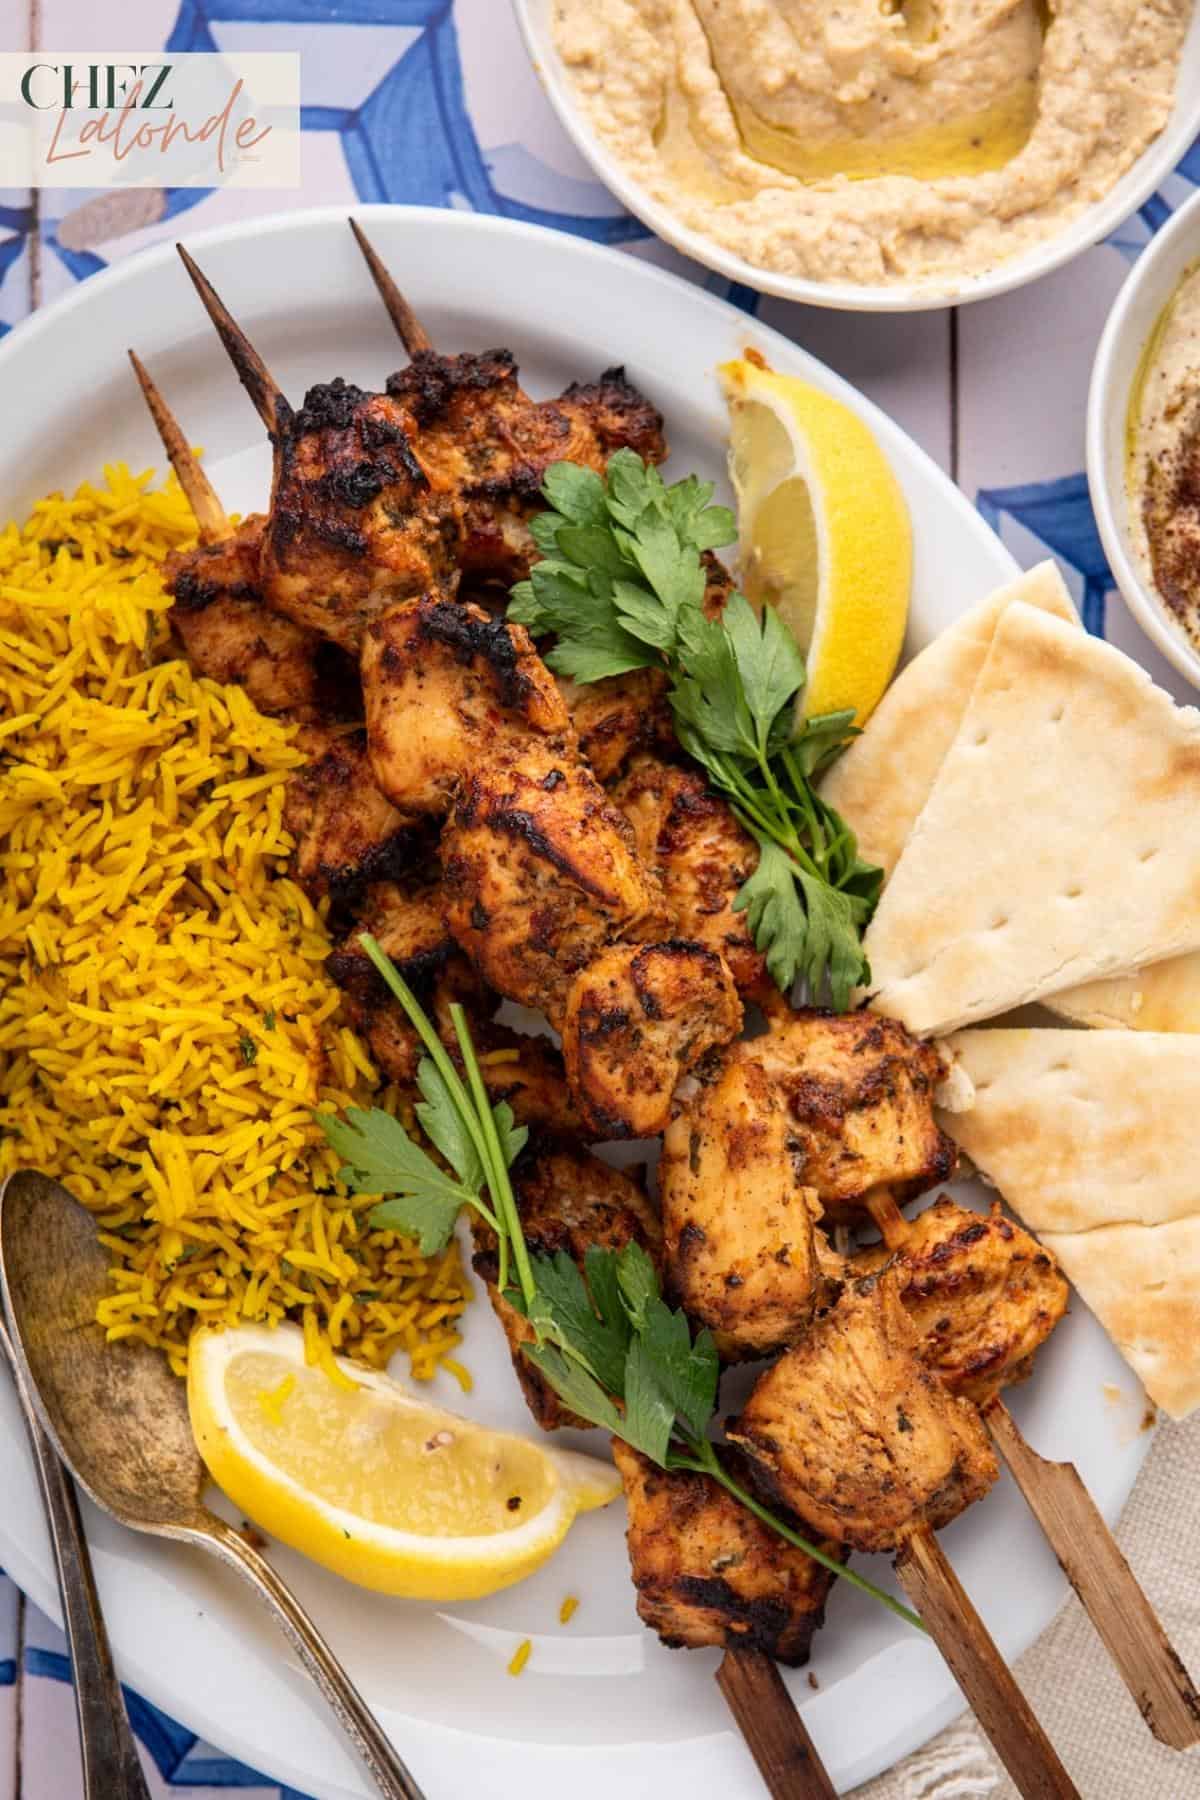 A plate of Shish tawook rice platter.